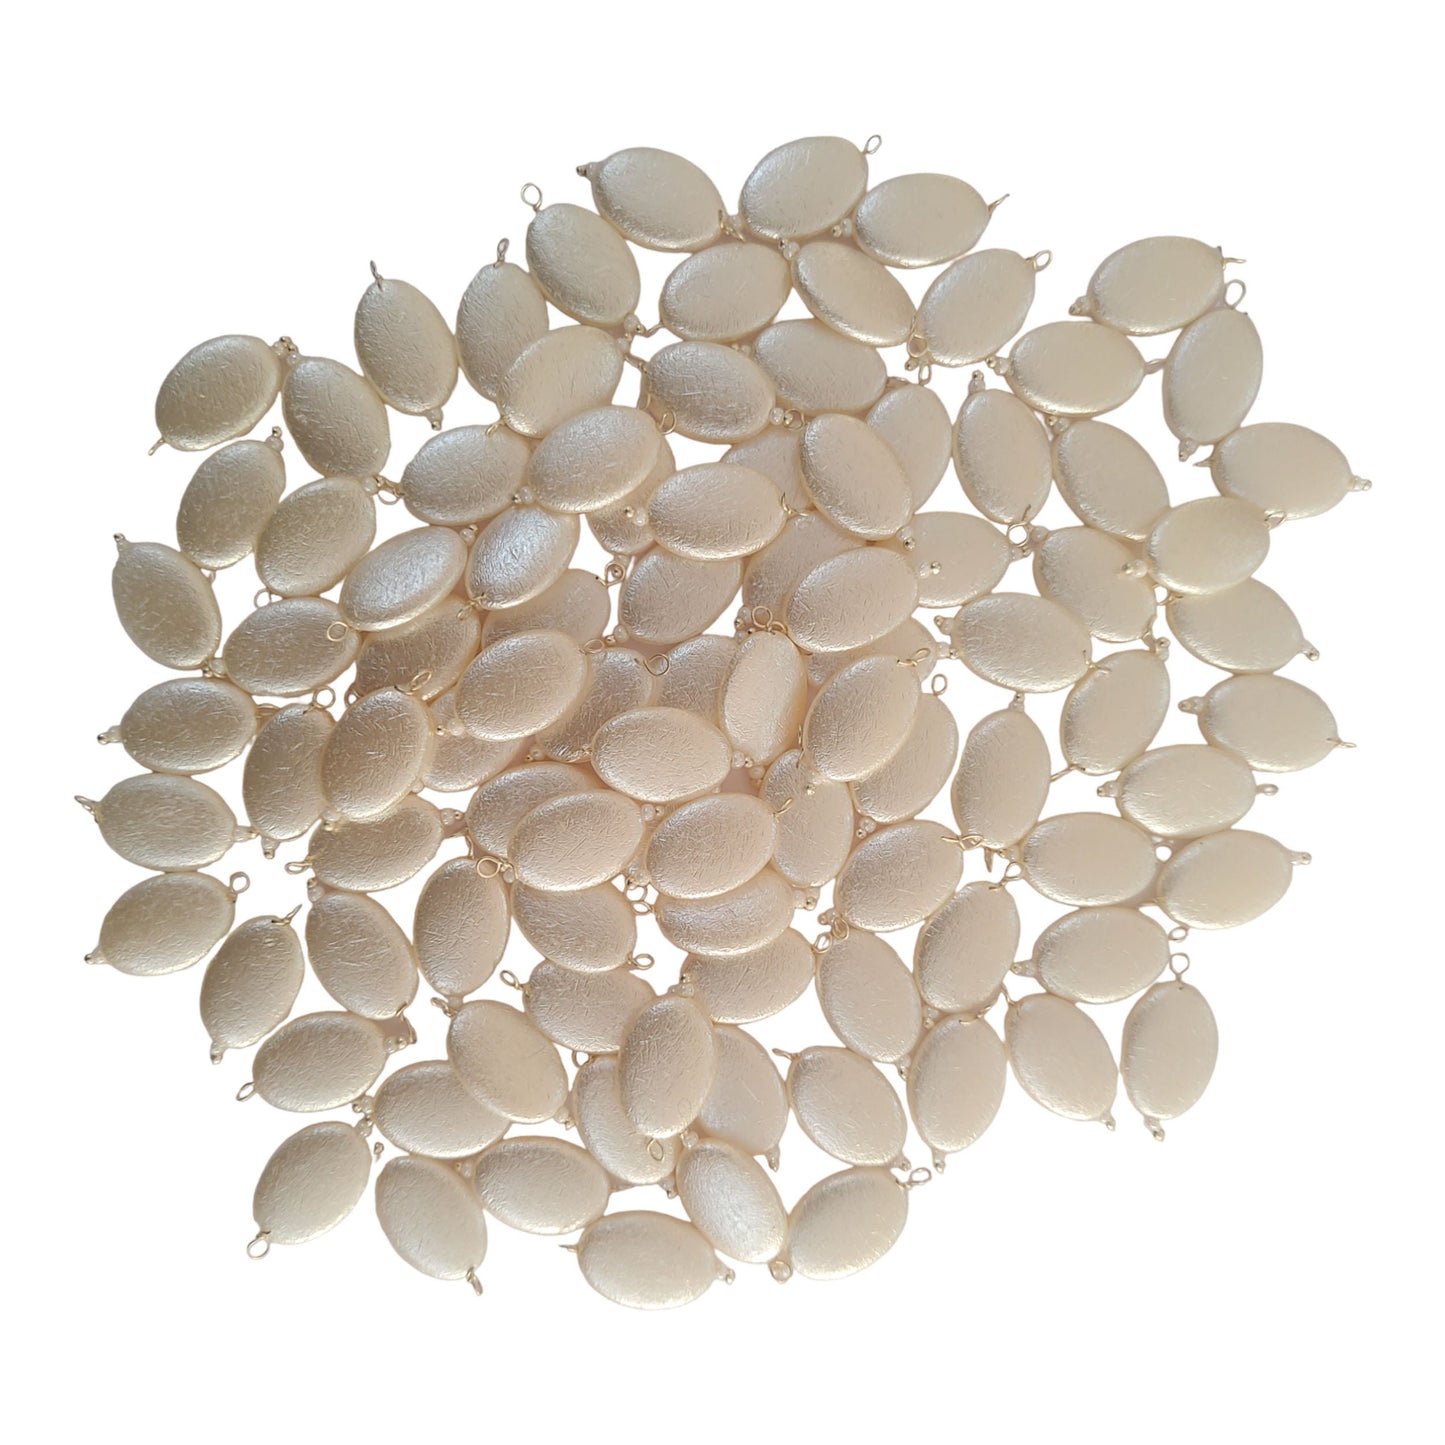 Indian Petals Colored ABS Seed Shaped Beads Ideal for Jewelry designing, Craft Making or Decor